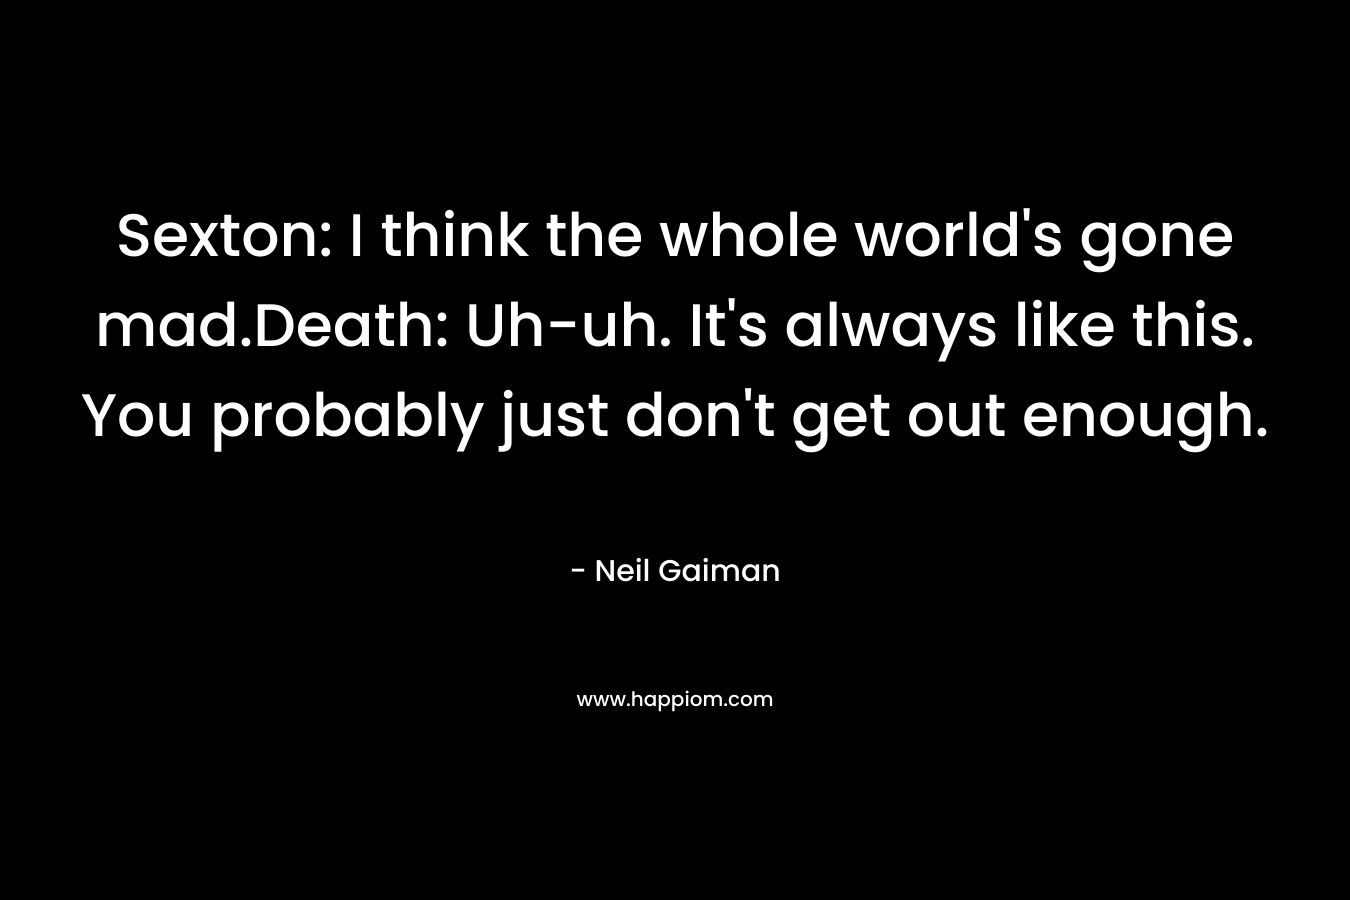 Sexton: I think the whole world's gone mad.Death: Uh-uh. It's always like this. You probably just don't get out enough.